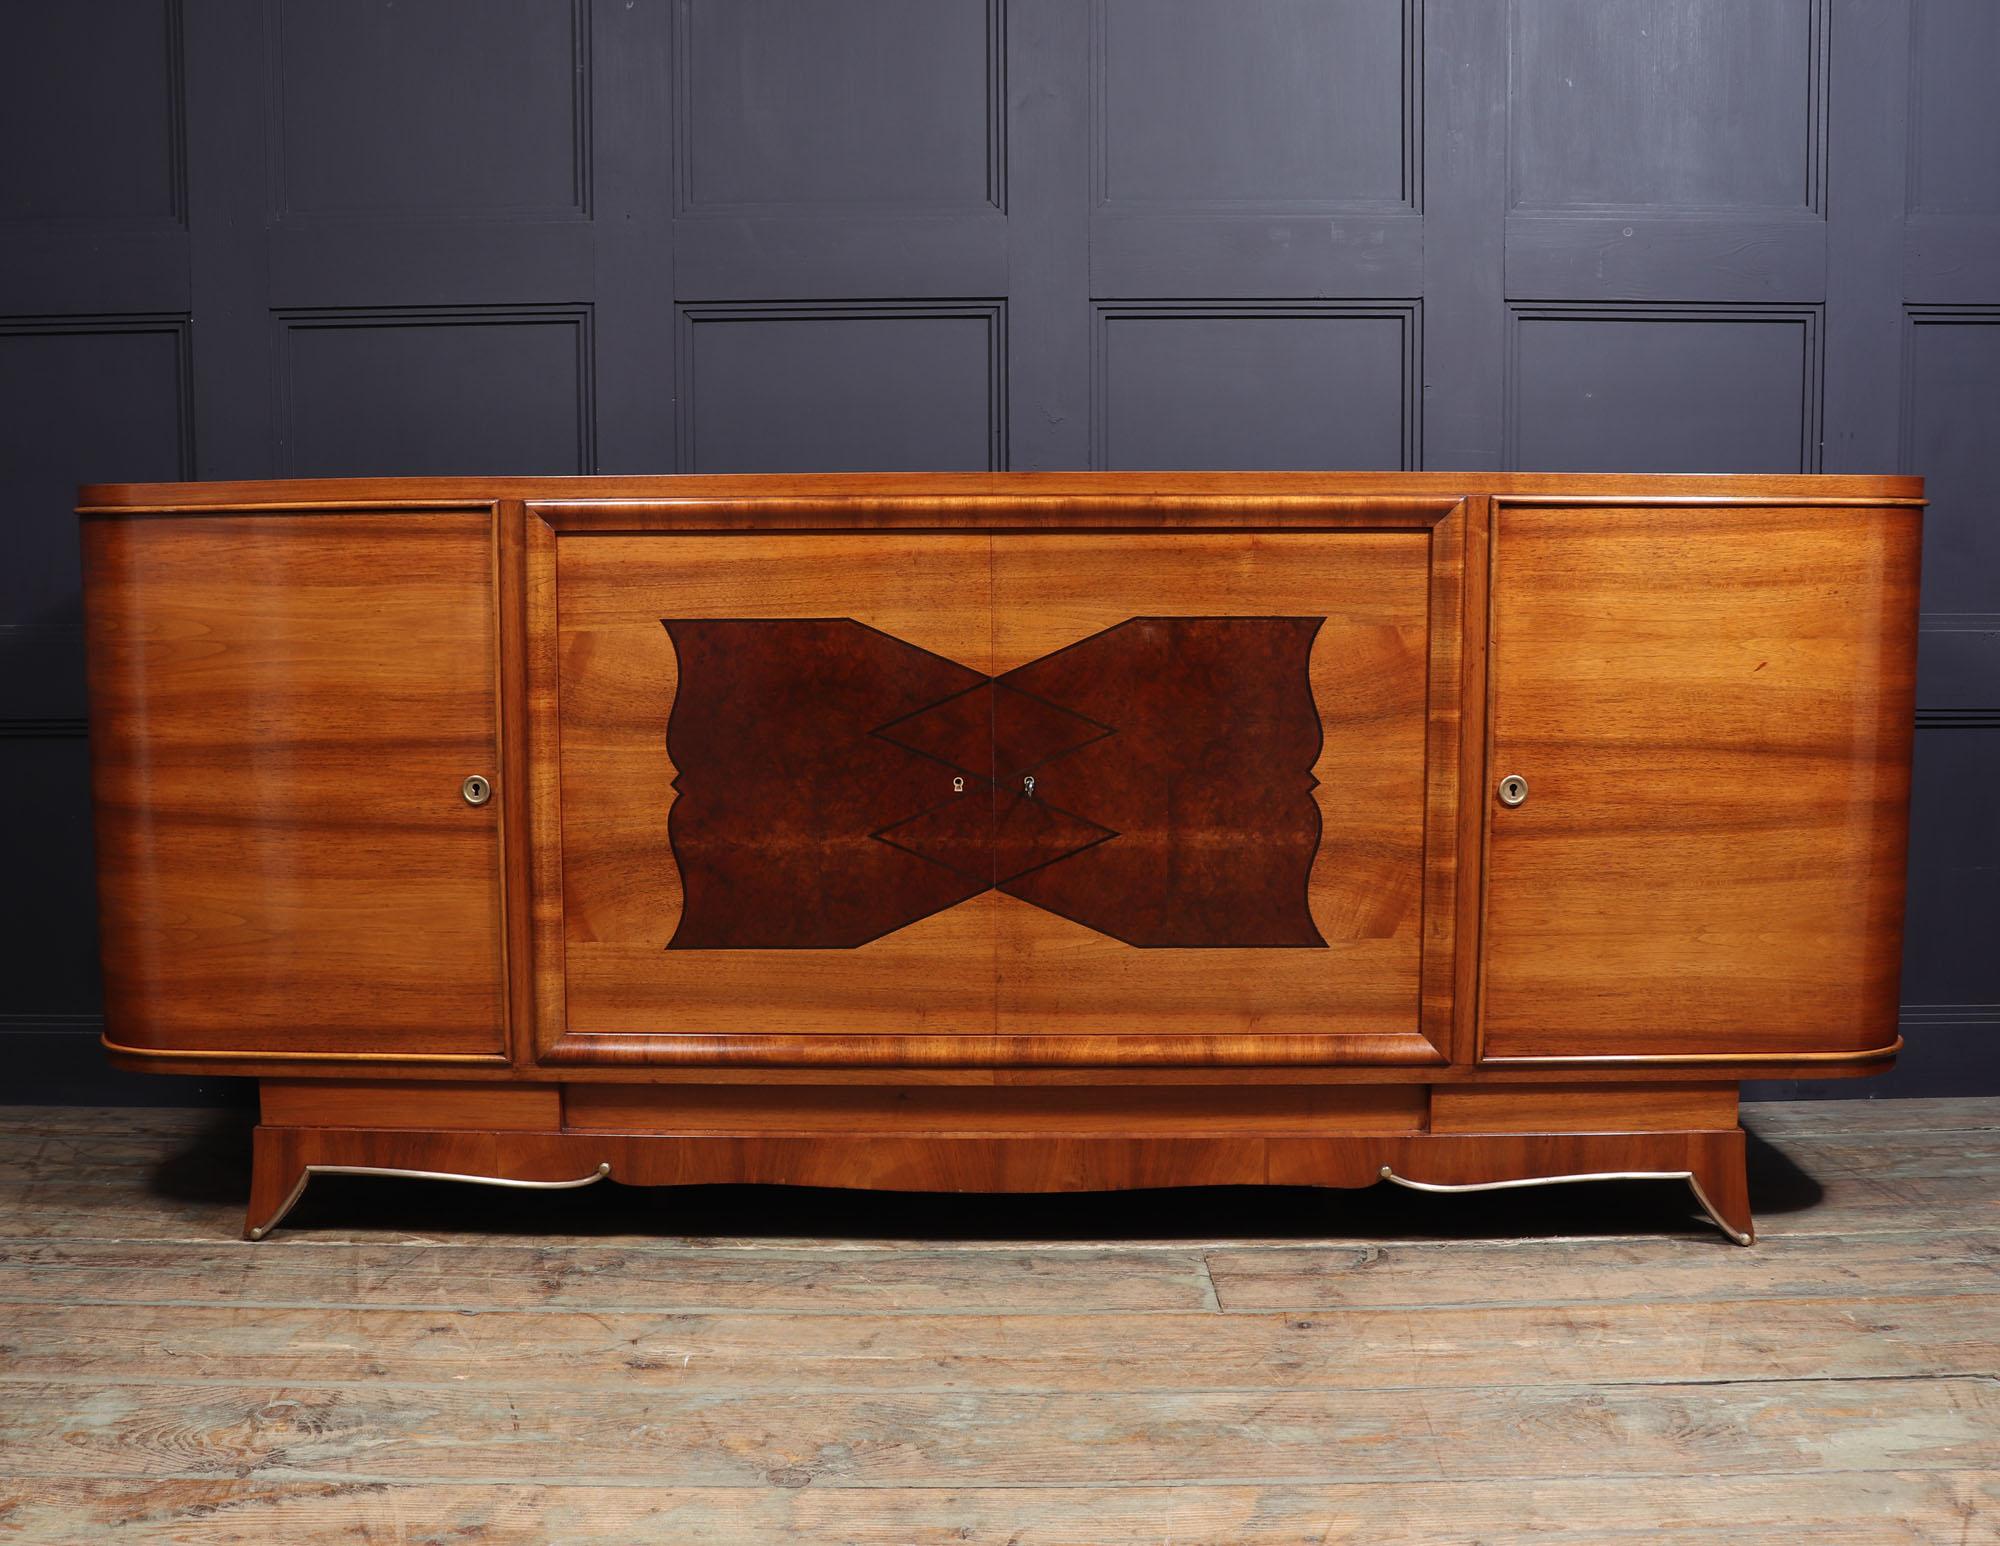 French, Art Deco Sideboard in Walnut In Excellent Condition For Sale In Paddock Wood Tonbridge, GB